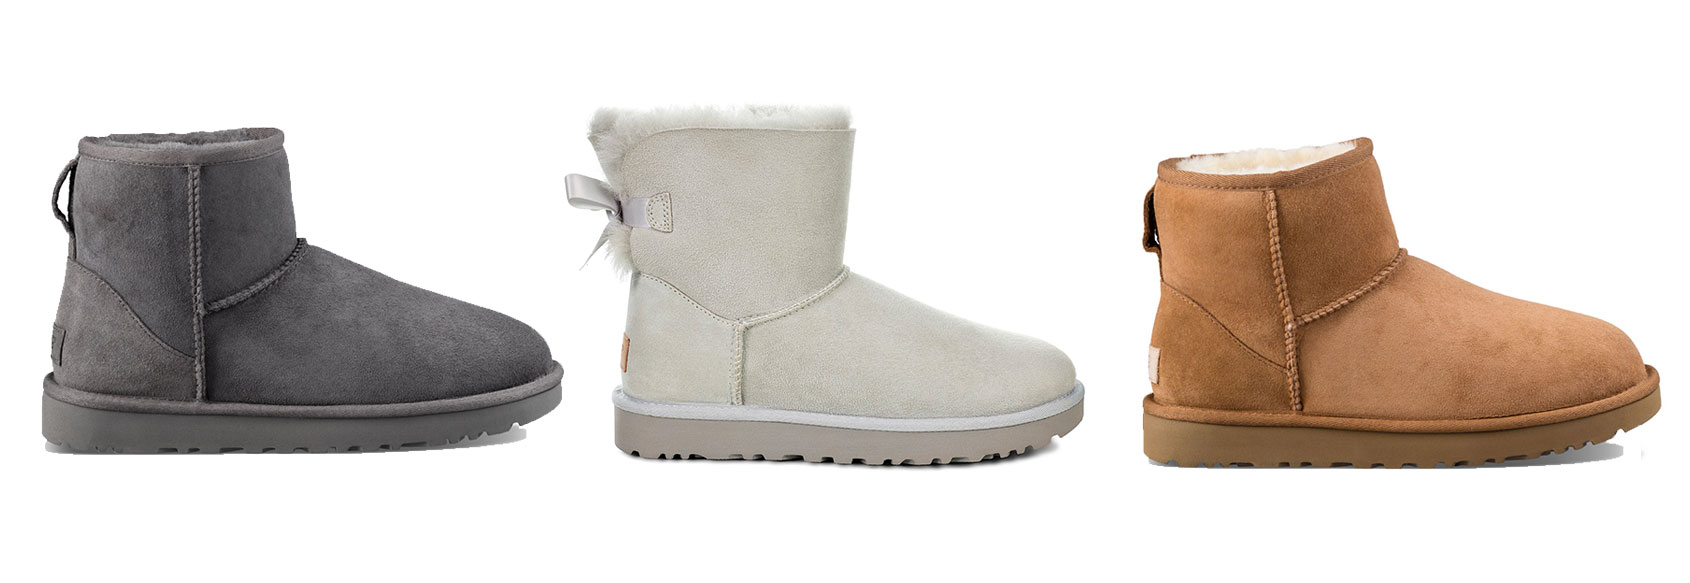 womens ugg boots 2018